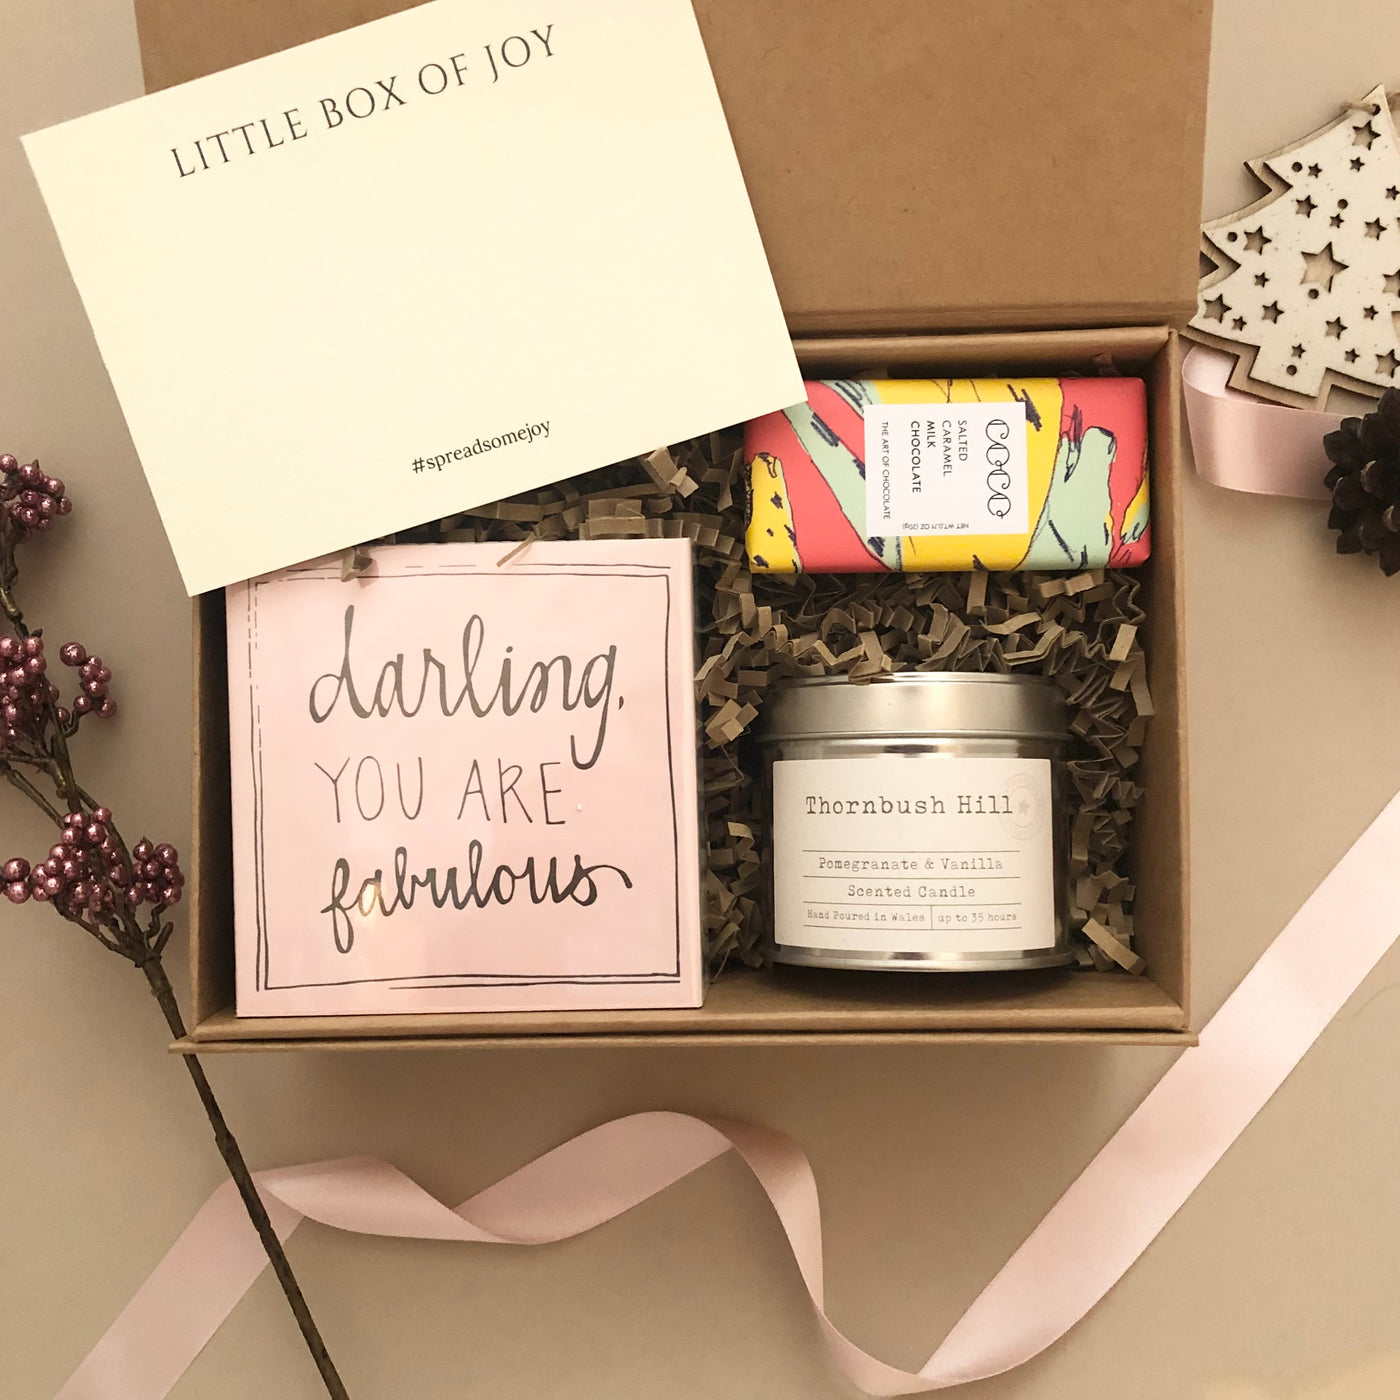 Moment of calm gift box small kraft box contains darling you are fabulous artisan matches, amber and tonka bean soy wax candle and small bar of salted caramel milk chocolate from coco Chocolatier 20g 